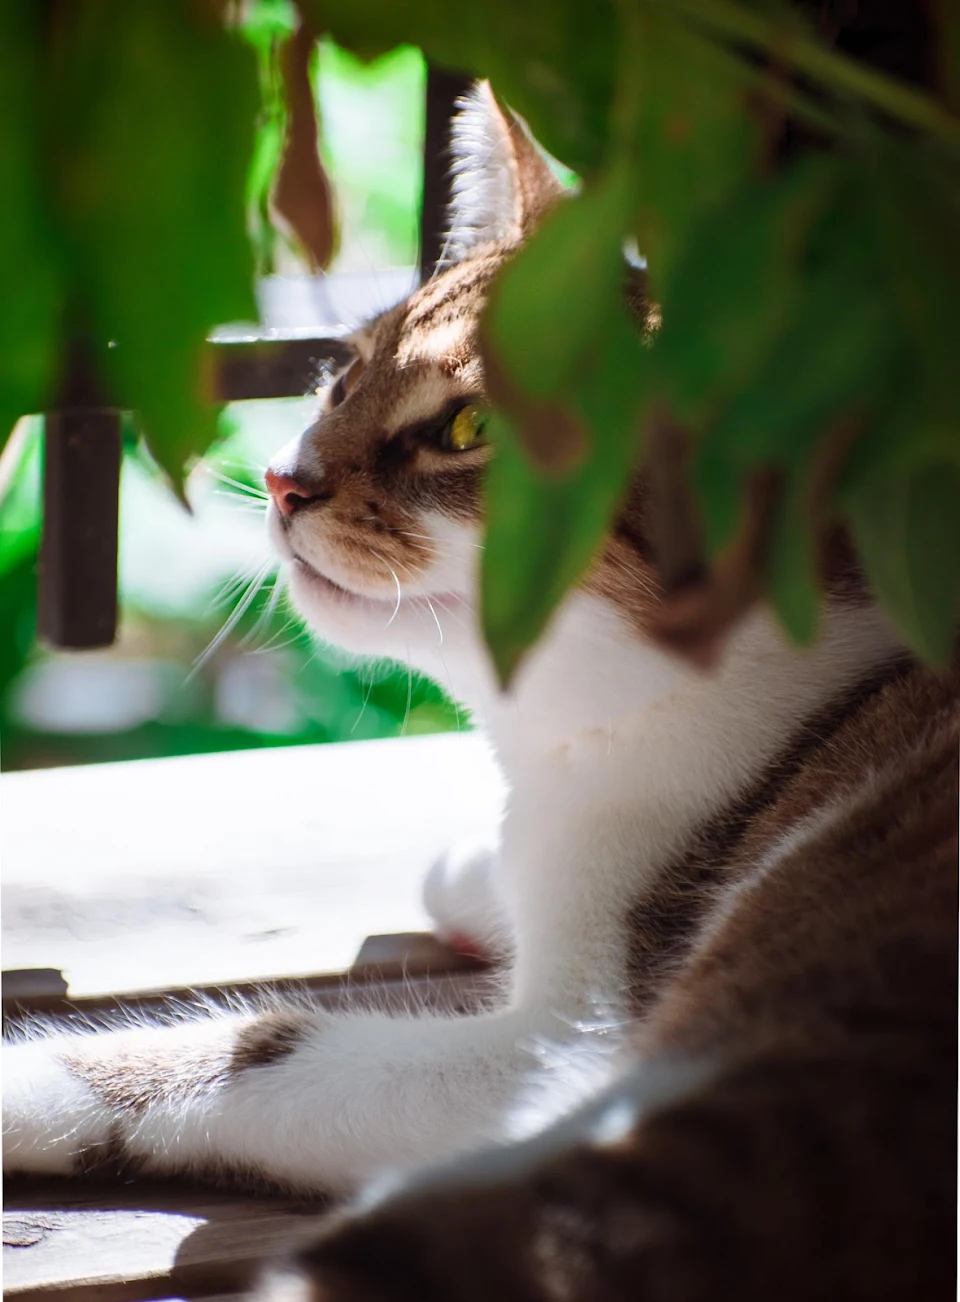 Our cat chilling under her favorite basil plant